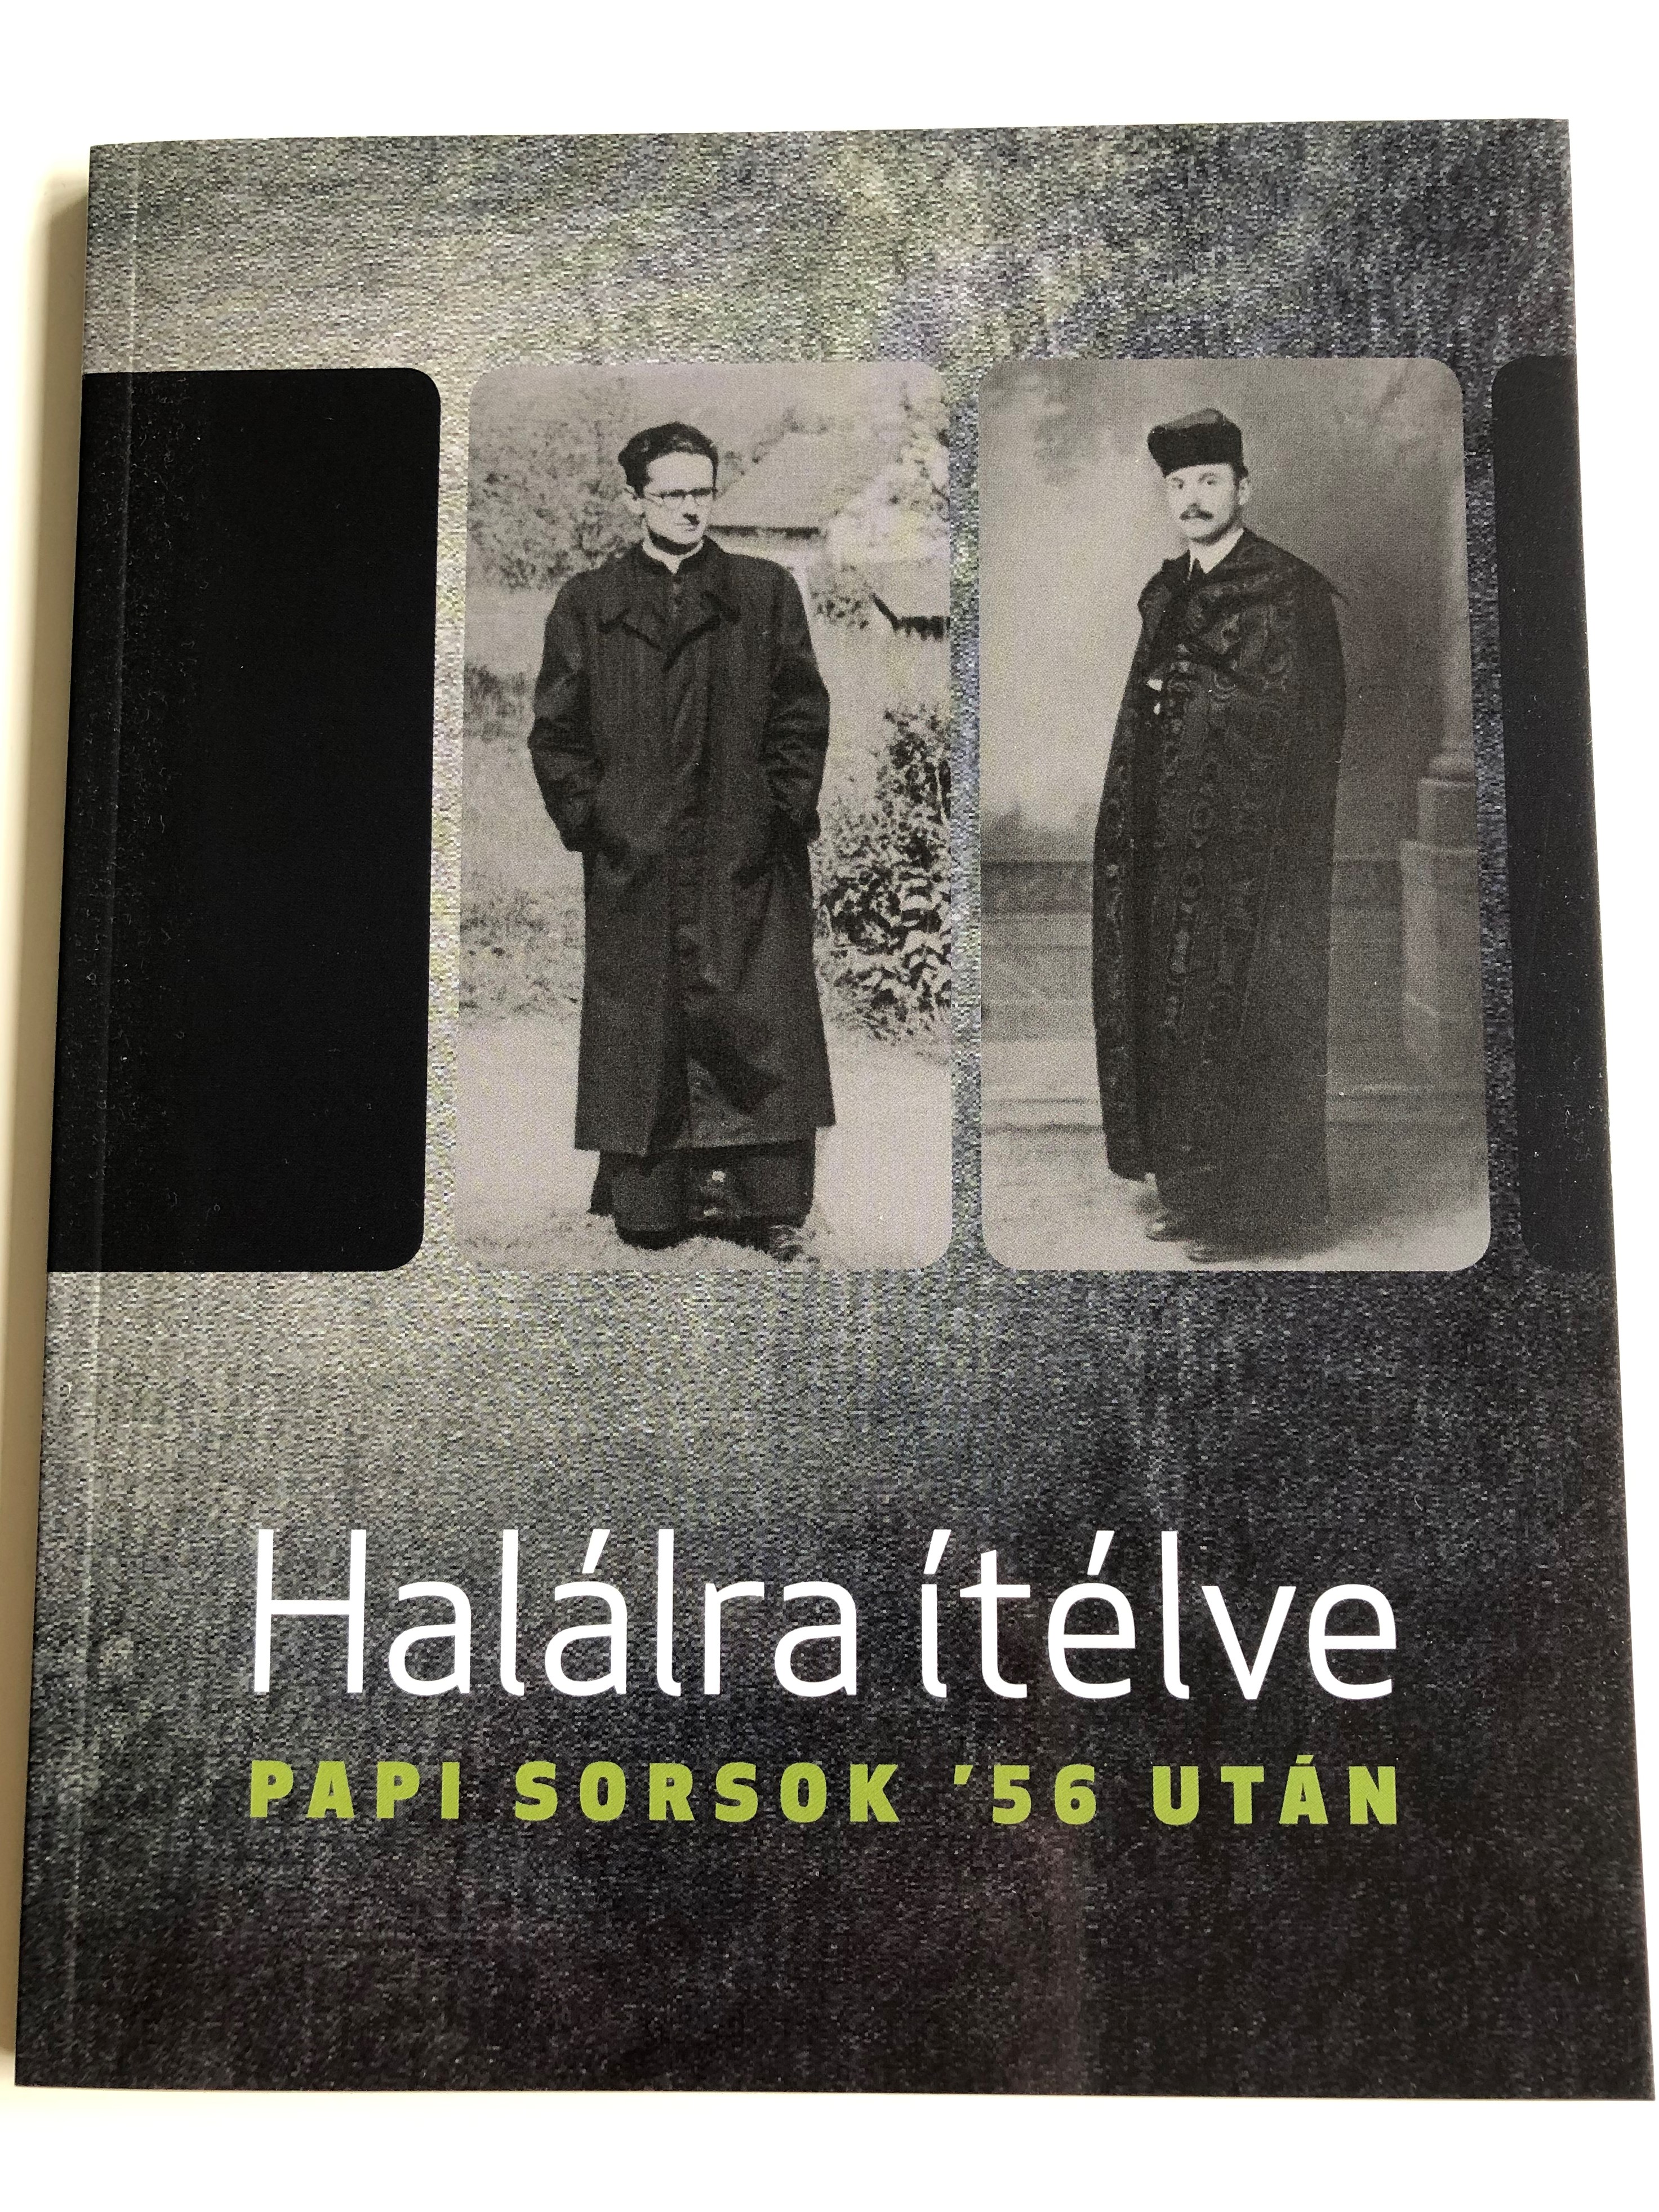 hal-lra-t-lve-papi-sorsok-56-ut-n-sentenced-to-death-destinies-of-priests-in-hungary-after-the-56-revolution-contains-lecutres-held-on-the-15th-dec.-2017-orsz-gh-z-kiad-2018-1-.jpg